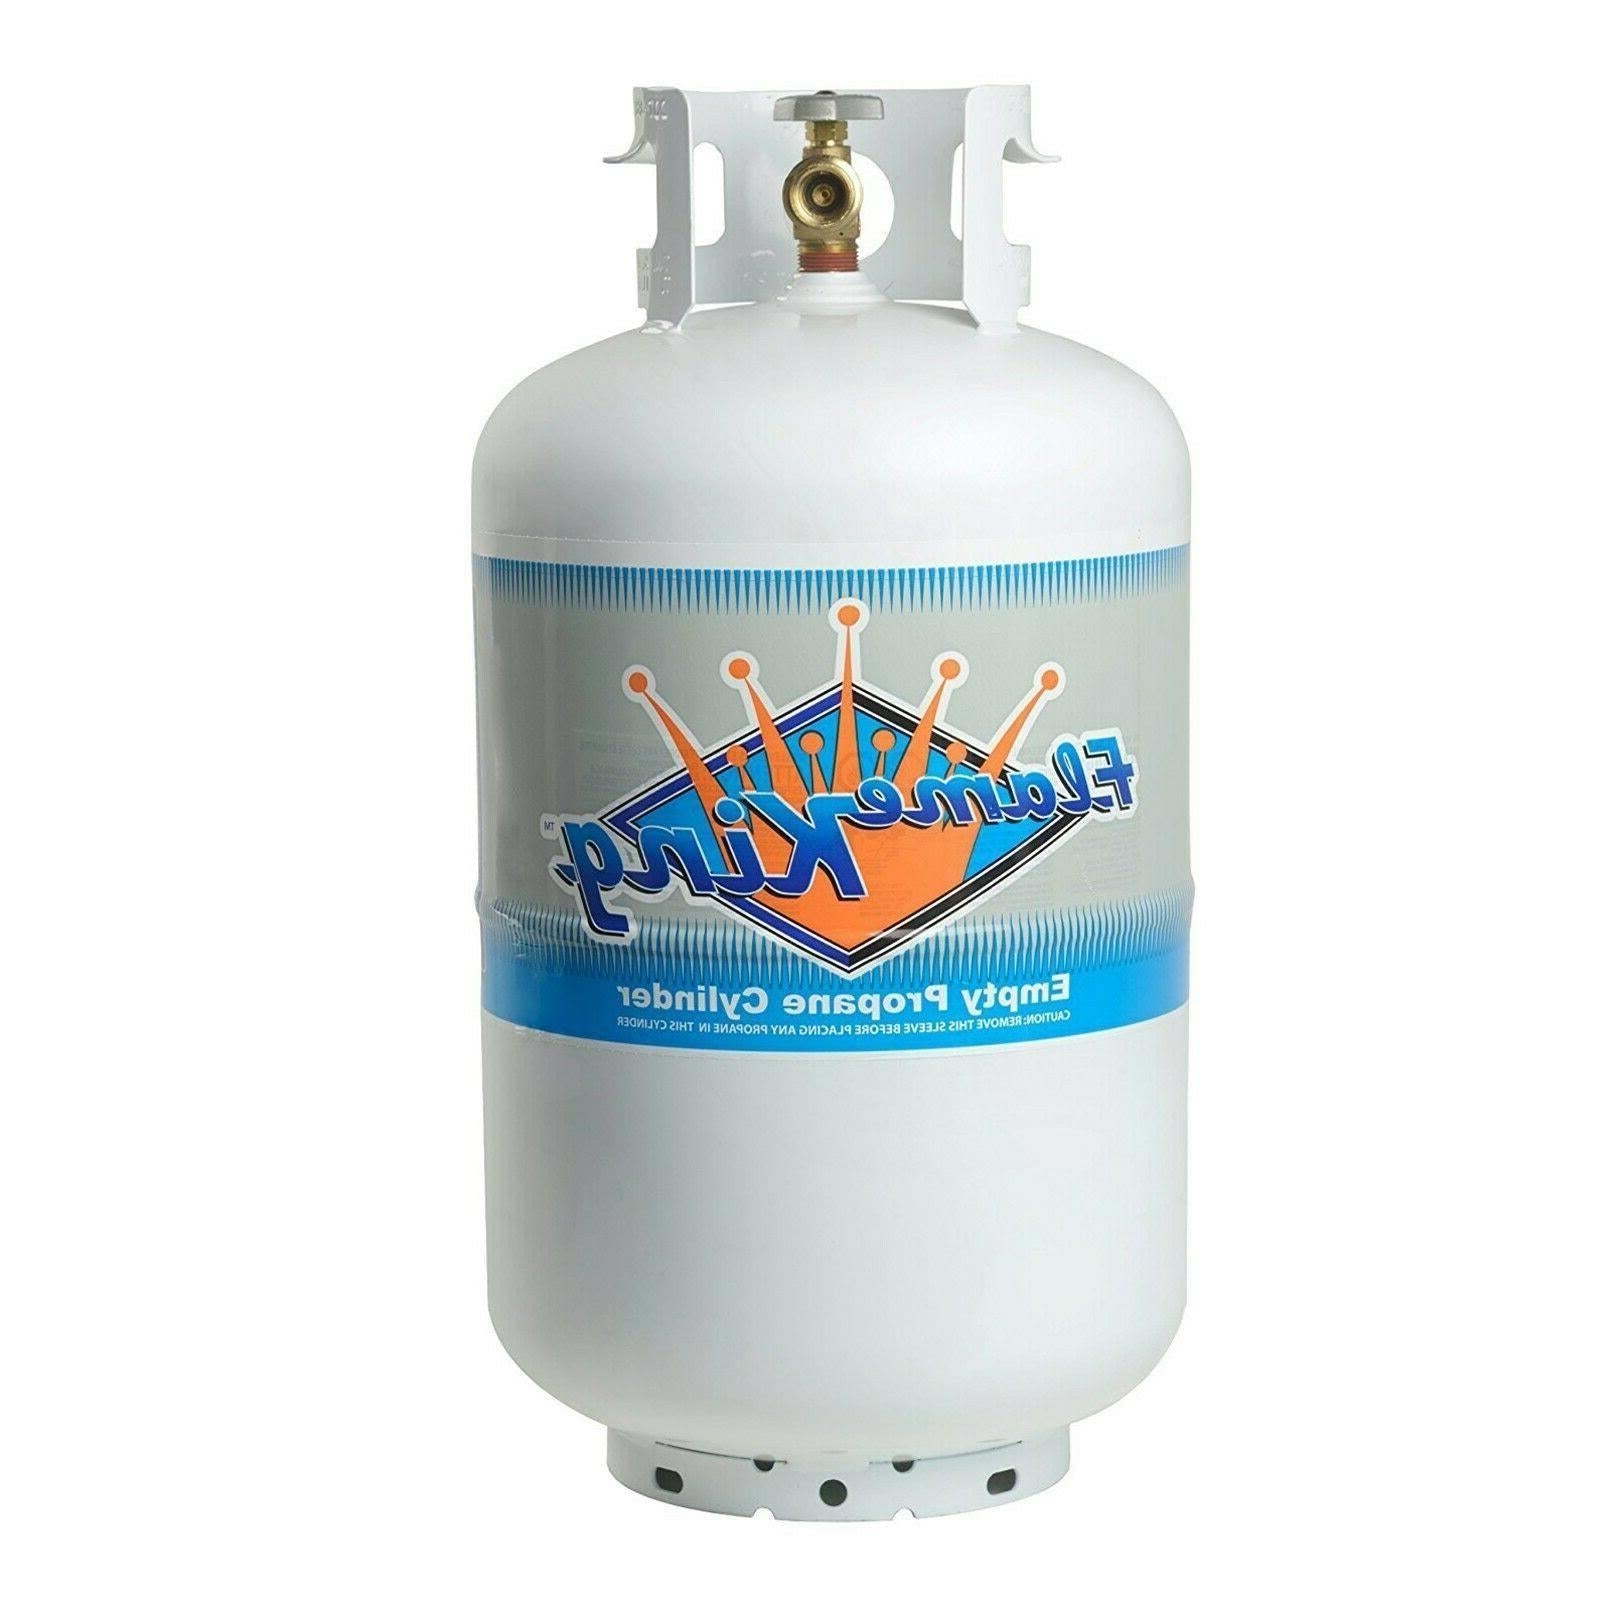 30 . Empty Propane Cylinder with Overfill Protection Device Valve